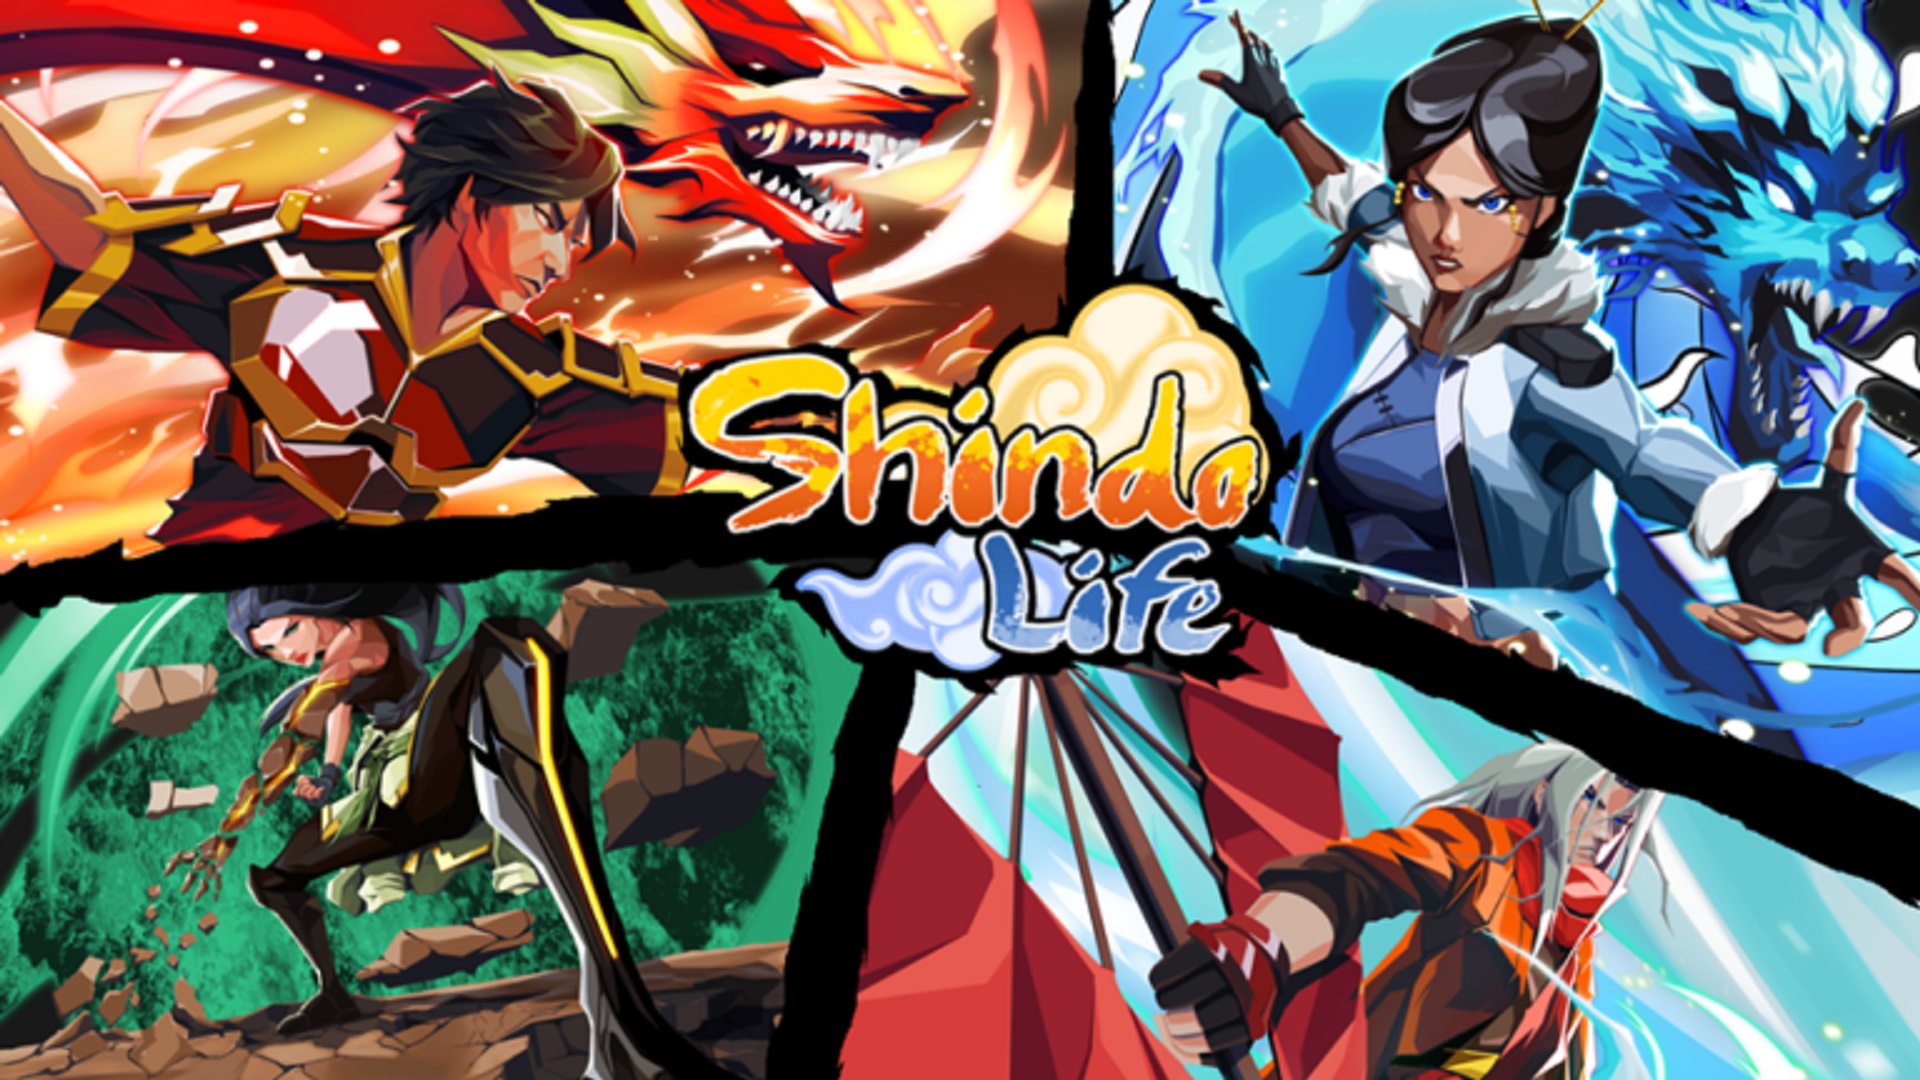 Four different Shindo Life characters with the game logo in the middle